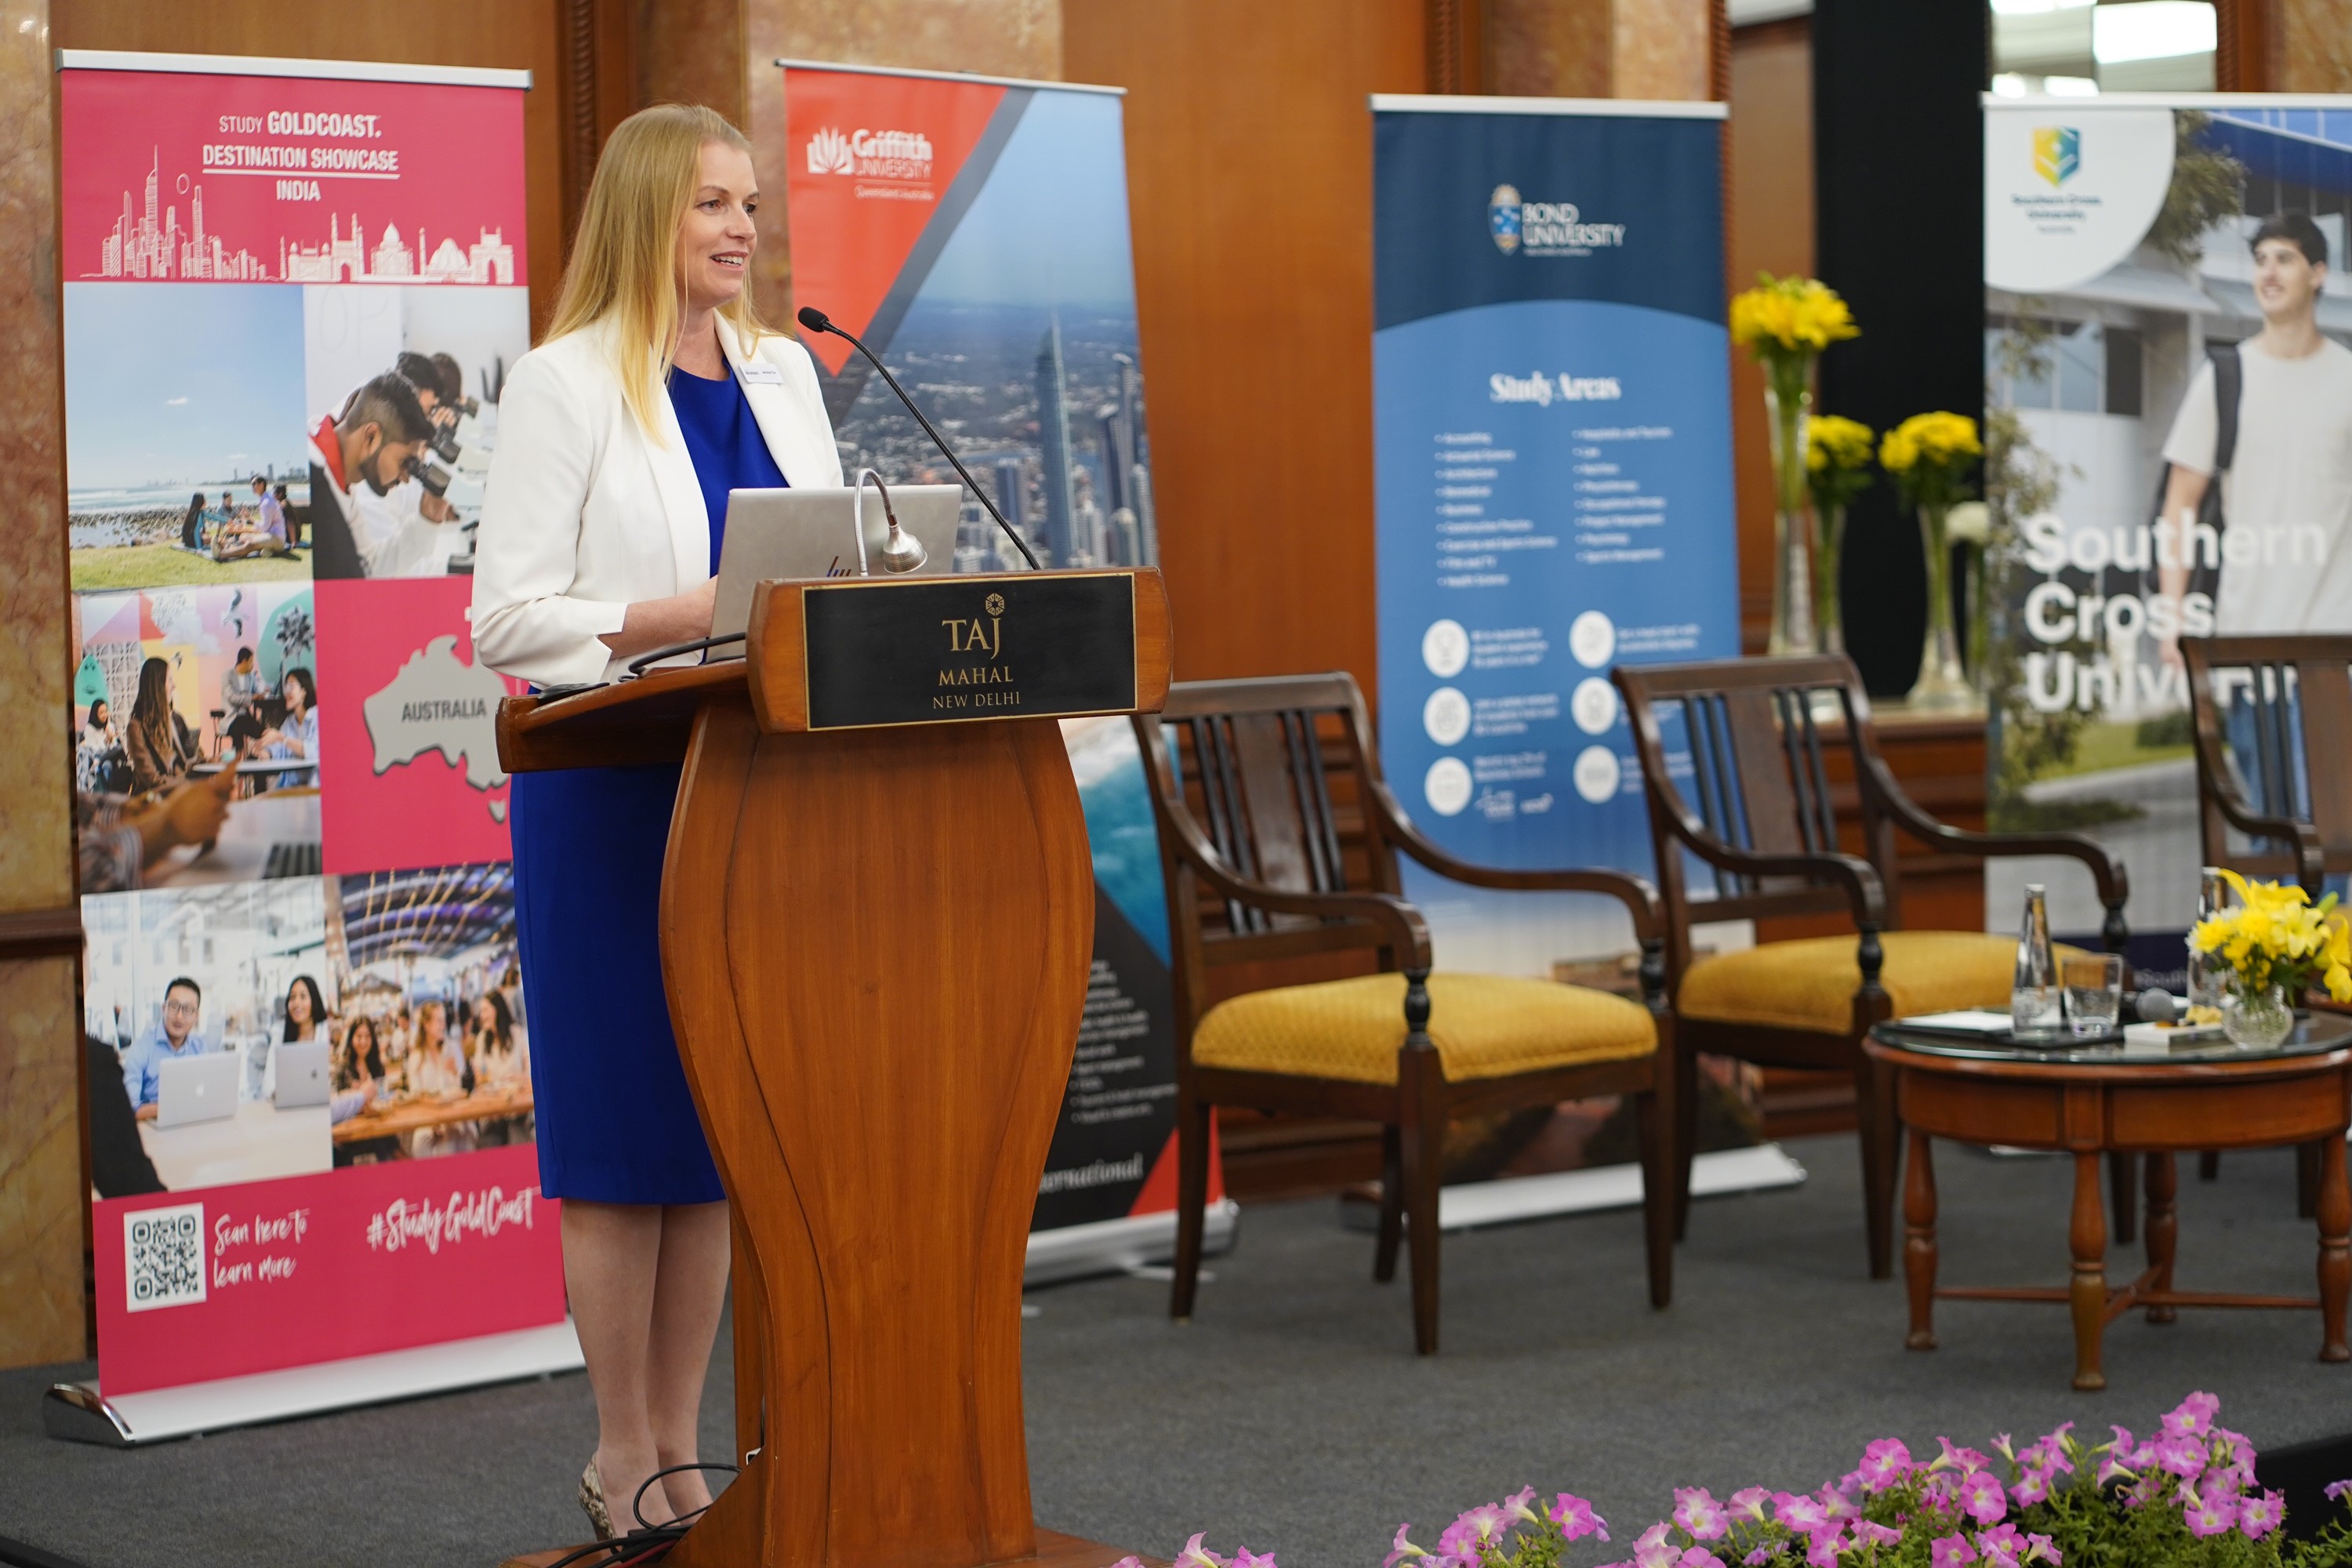 Study Queensland presents an exciting gamut of opportunities for students at Gold Coast, Australia